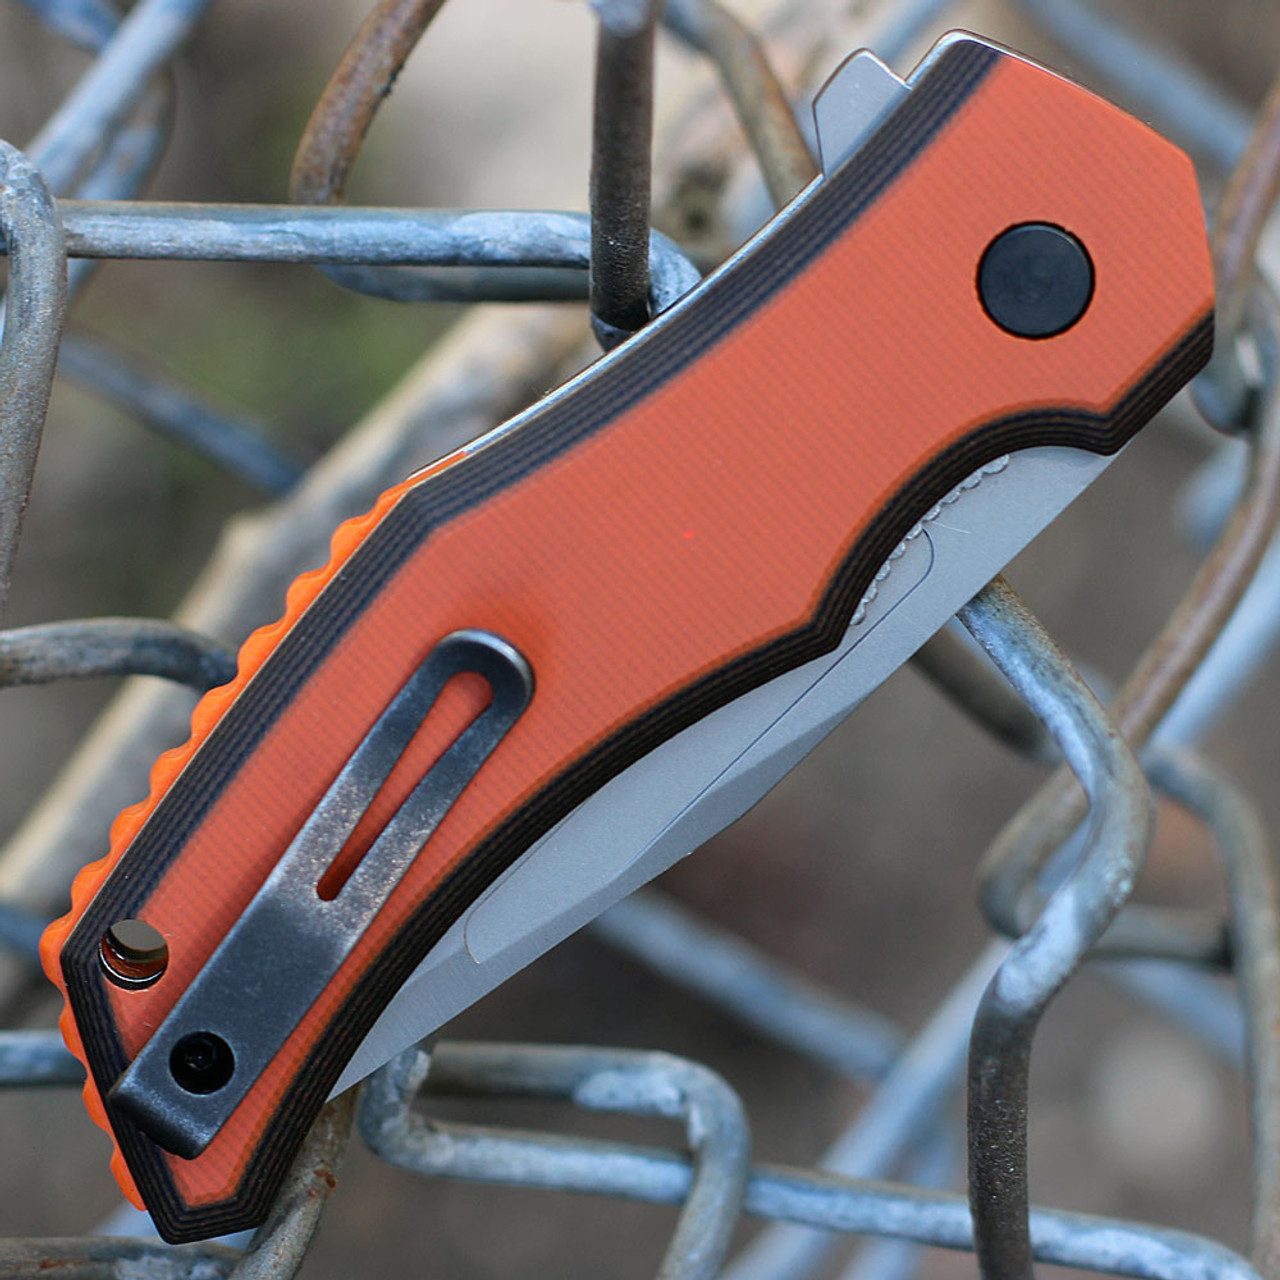 CRKT Fawkes A/O (CR2372) 2.74" 1.4116 Bead Blasted Drop Point Blade, Orange and Black G-10 Handle